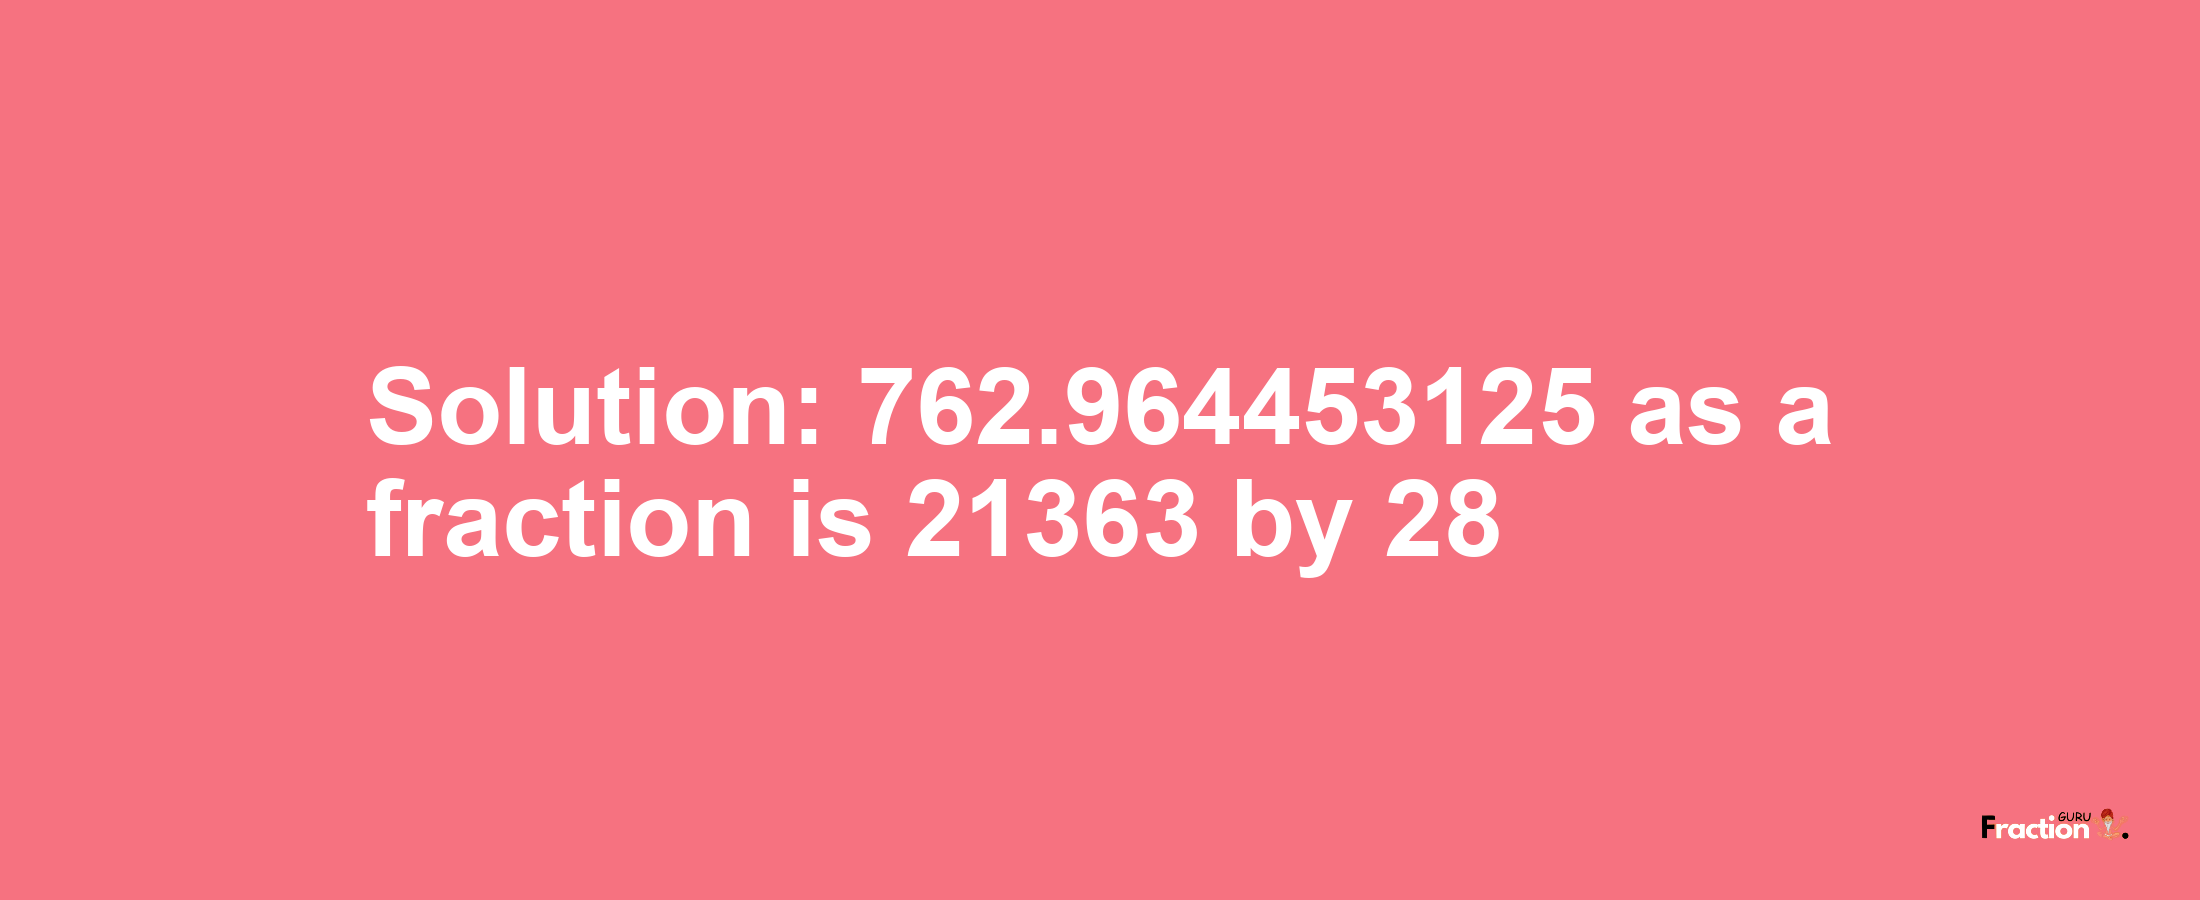 Solution:762.964453125 as a fraction is 21363/28